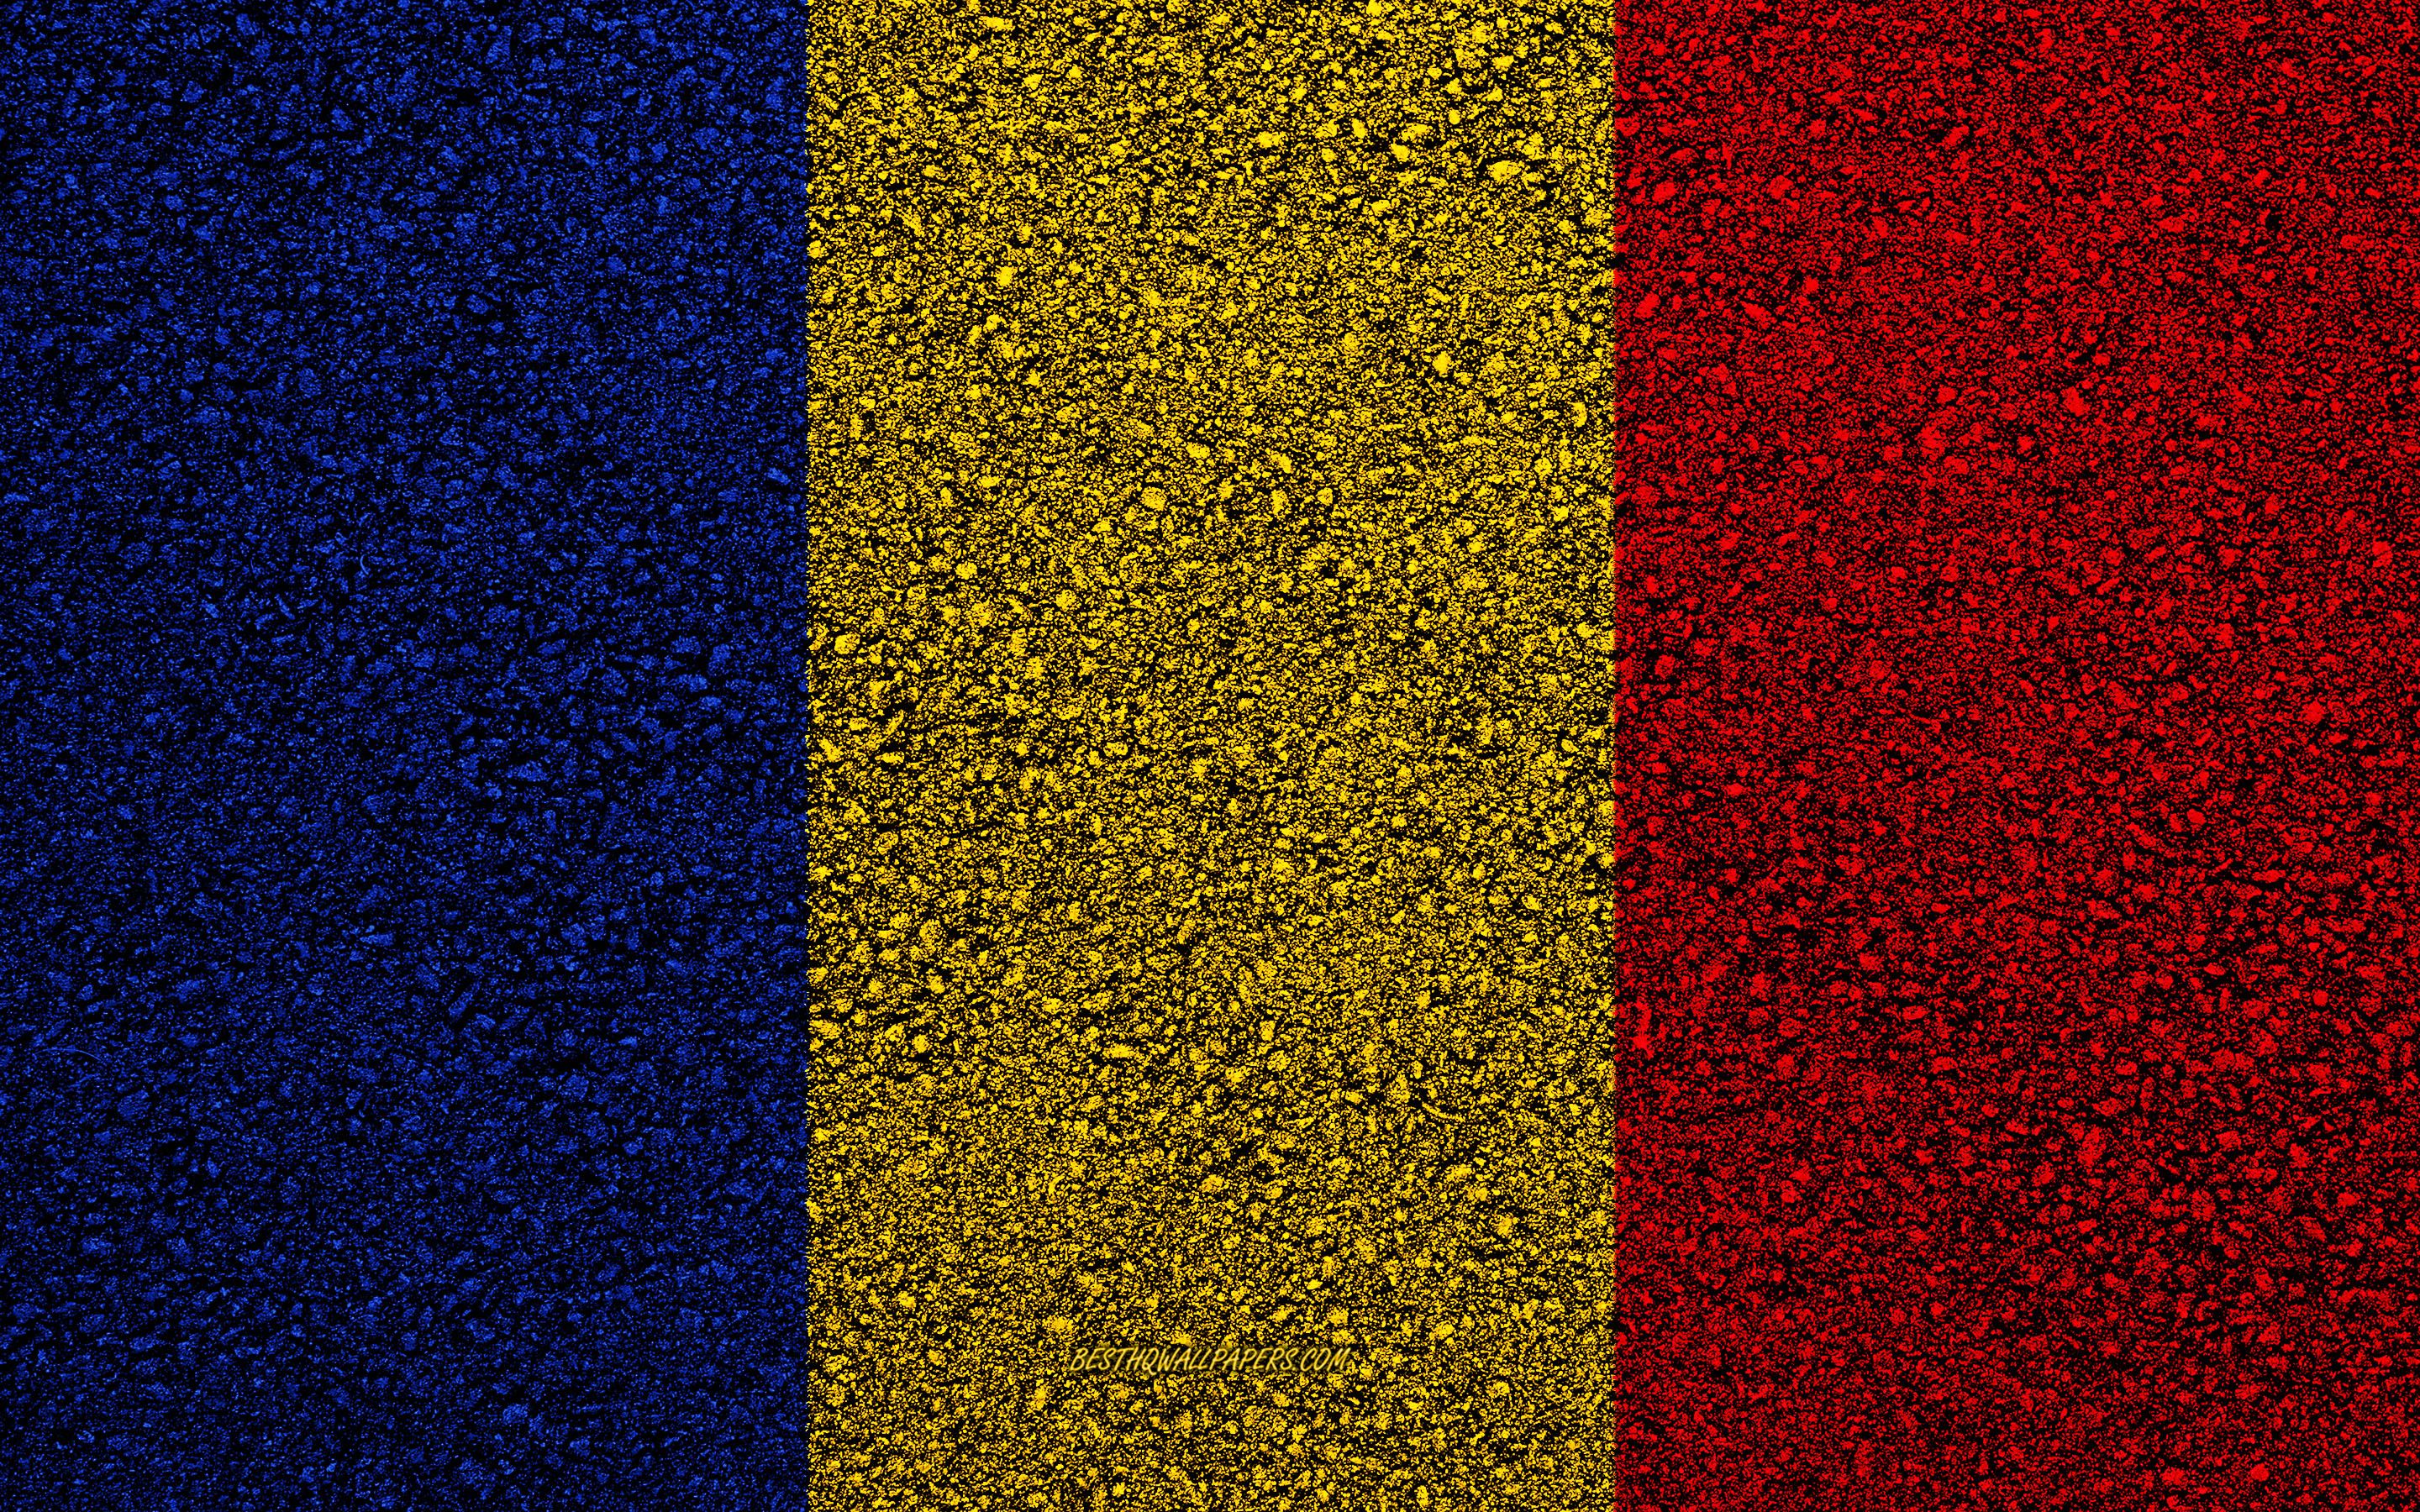 Download wallpaper Flag of Romania, asphalt texture, flag on asphalt, Romania flag, Europe, Romania, flags of european countries, Romanian flag for desktop with resolution 2880x1800. High Quality HD picture wallpaper